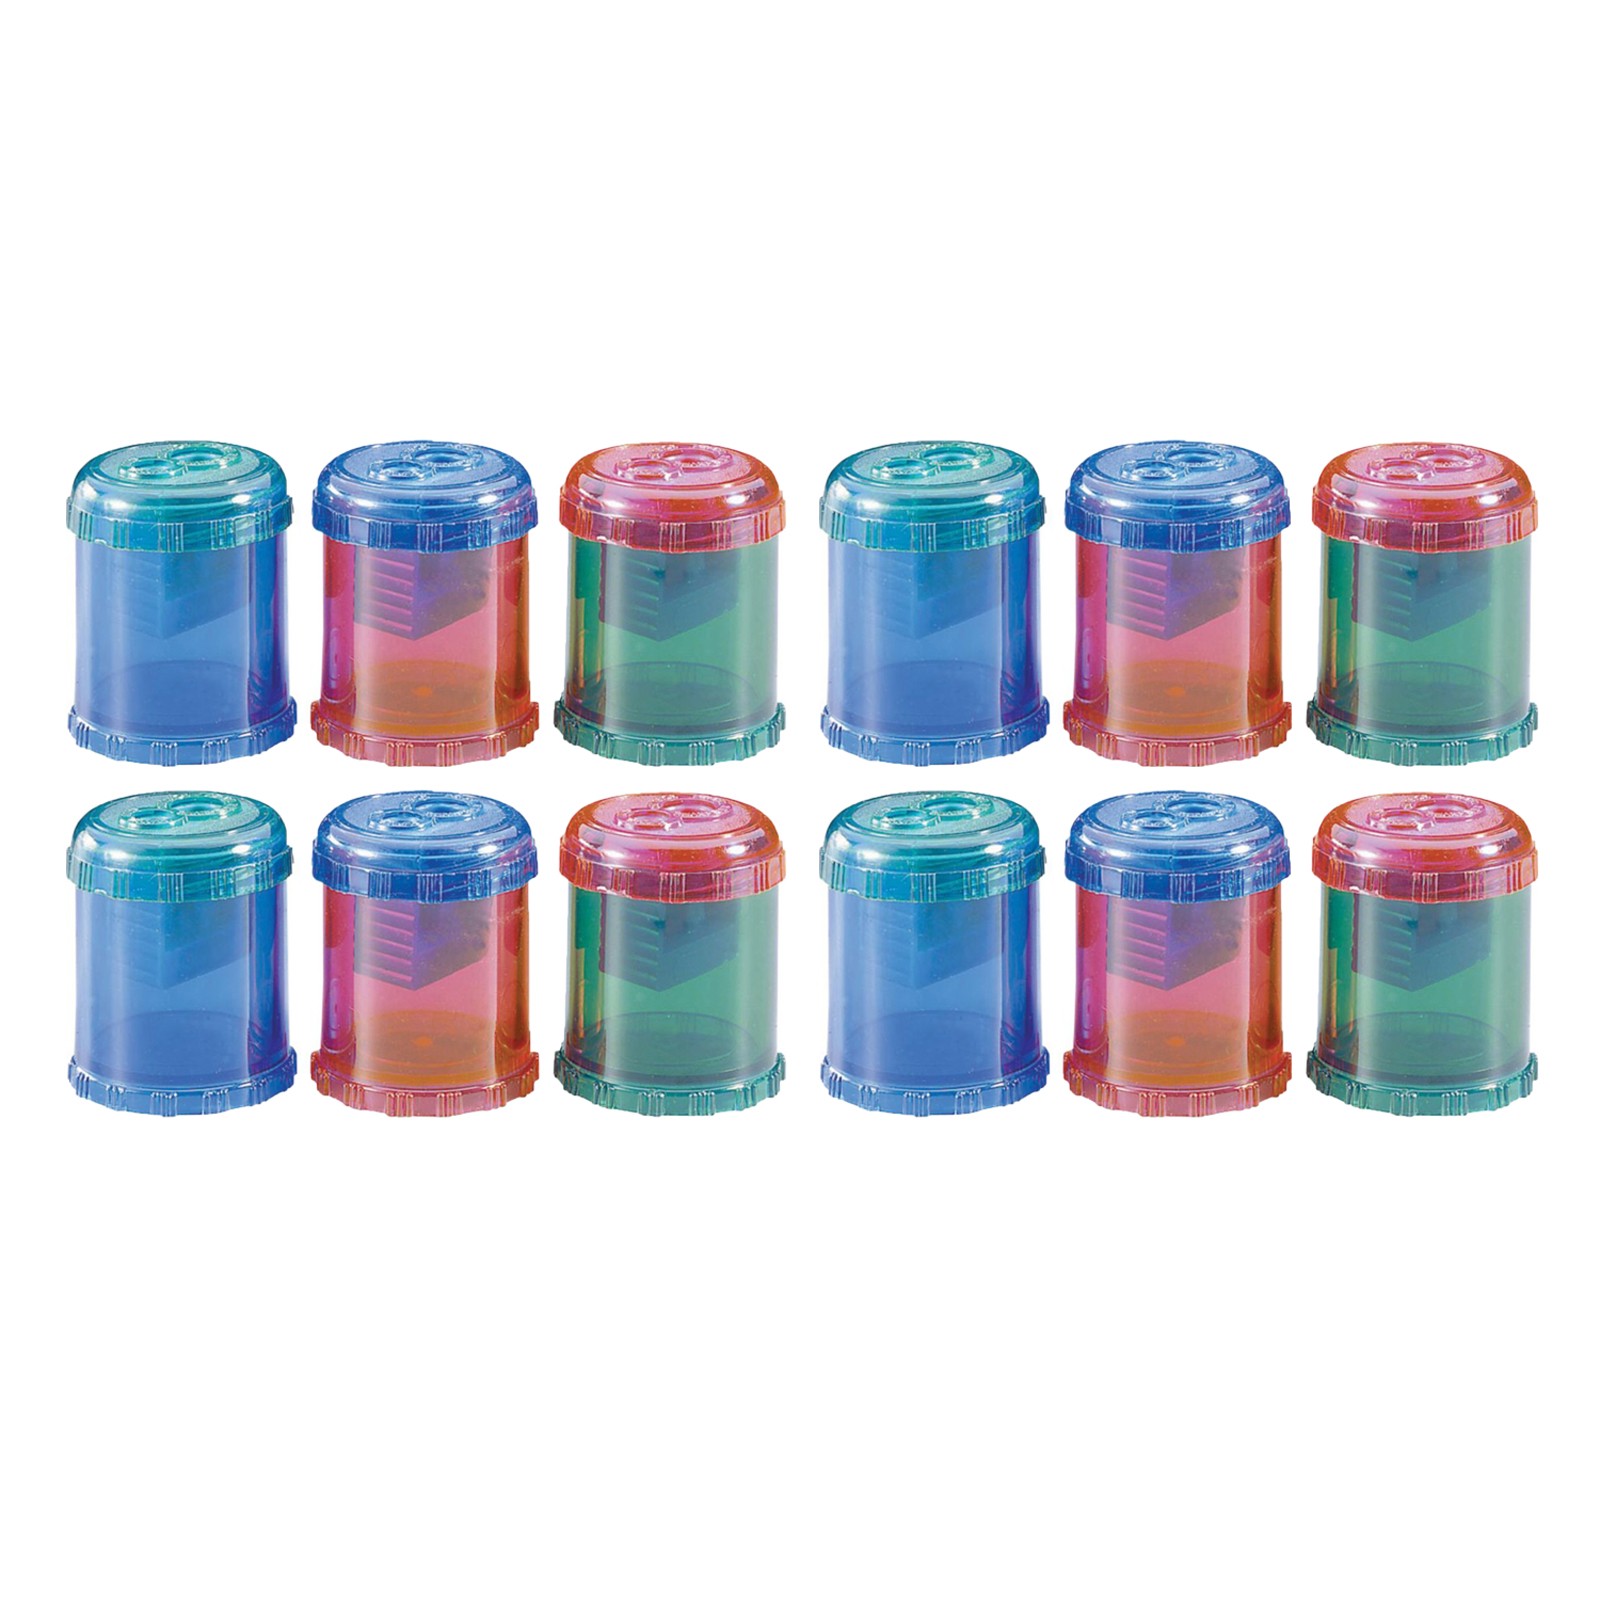 Manual 2-Hole Pencil and Crayon Sharpener, Assorted Colors, 12 Per Pack